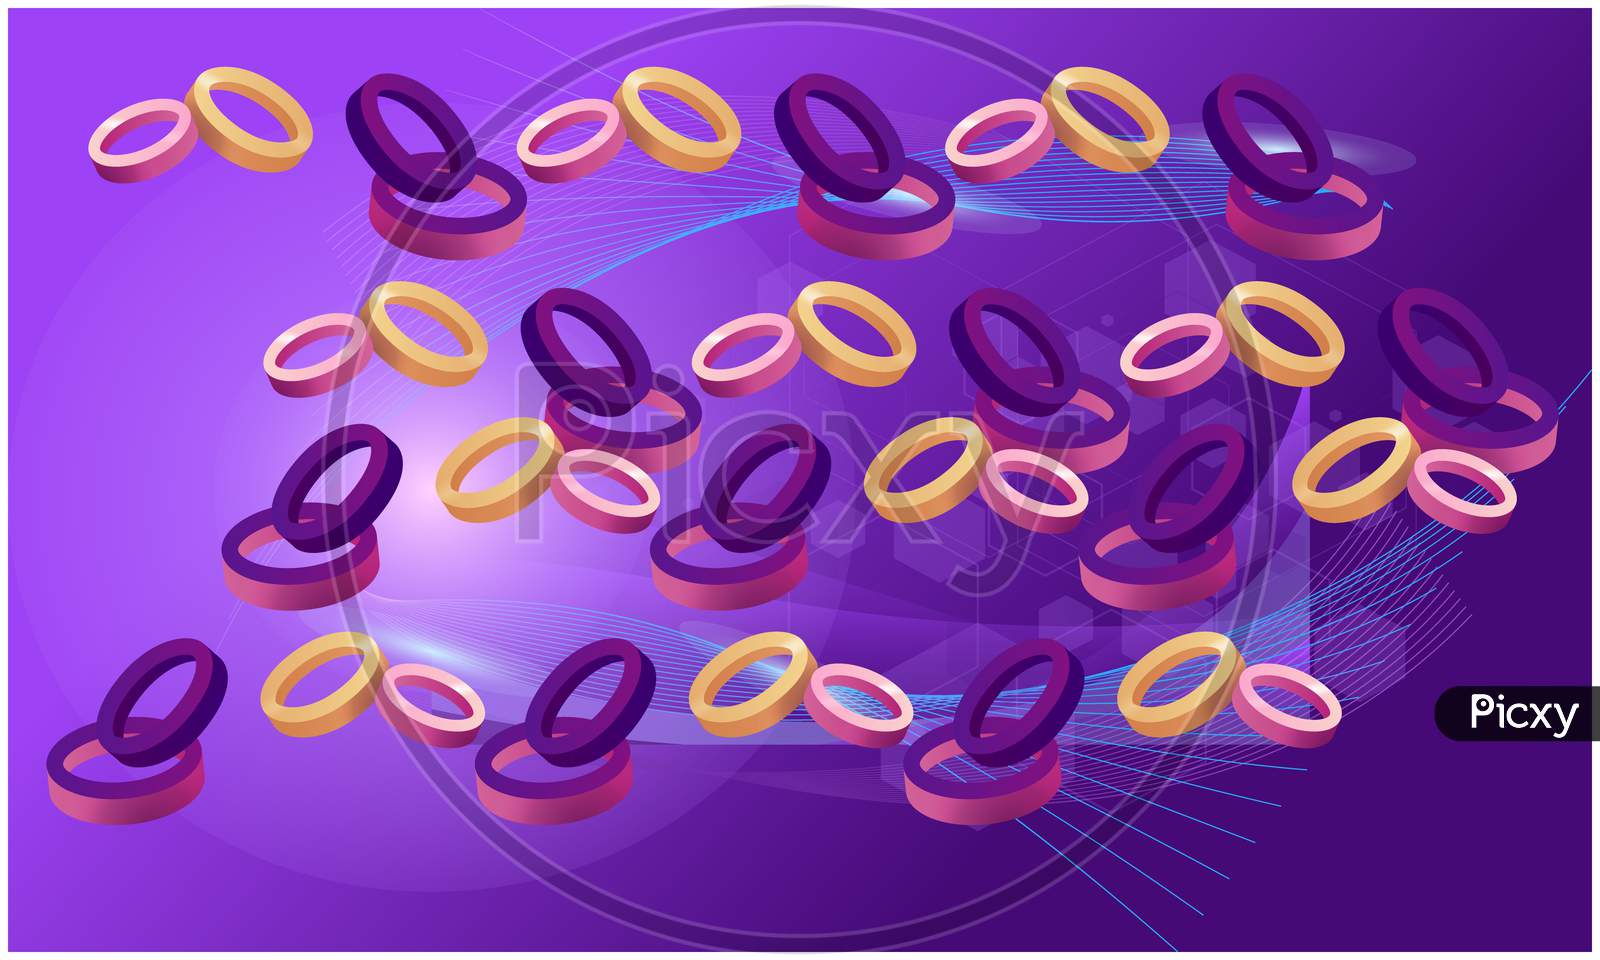 Digital Textile Design Of Various Rings On Abstract Background